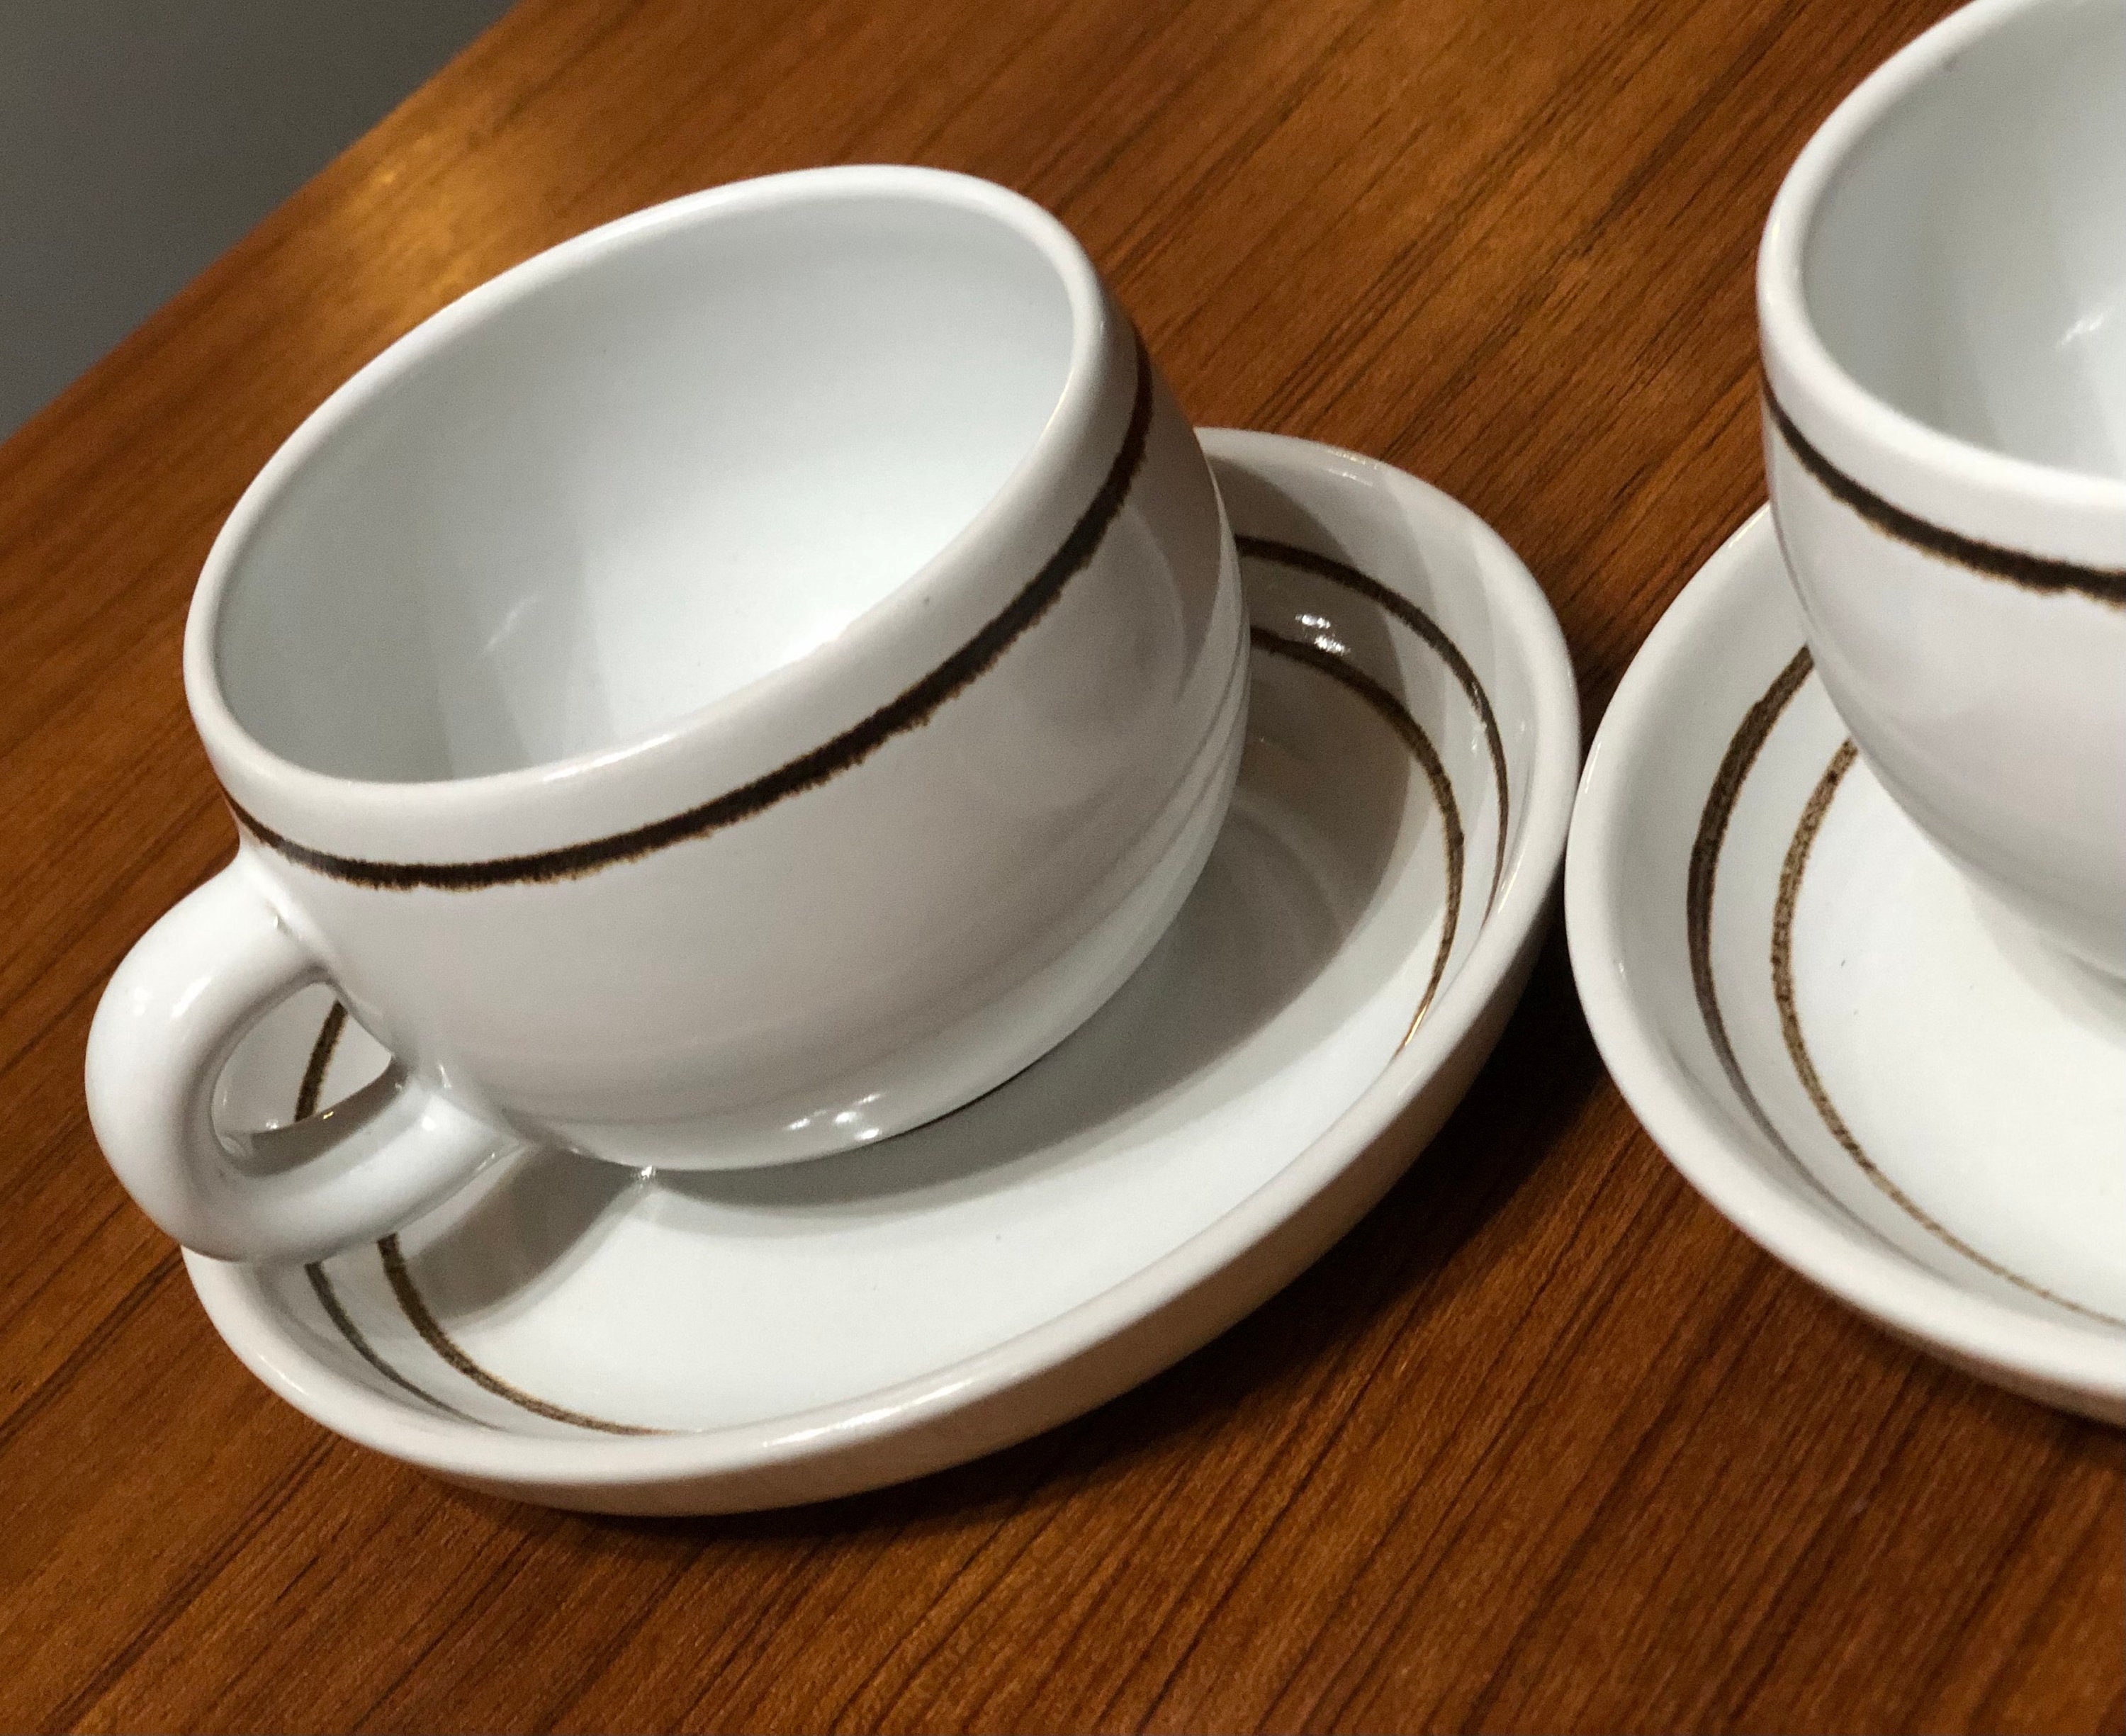 Cappuccino Cup & Saucer - Ledmore